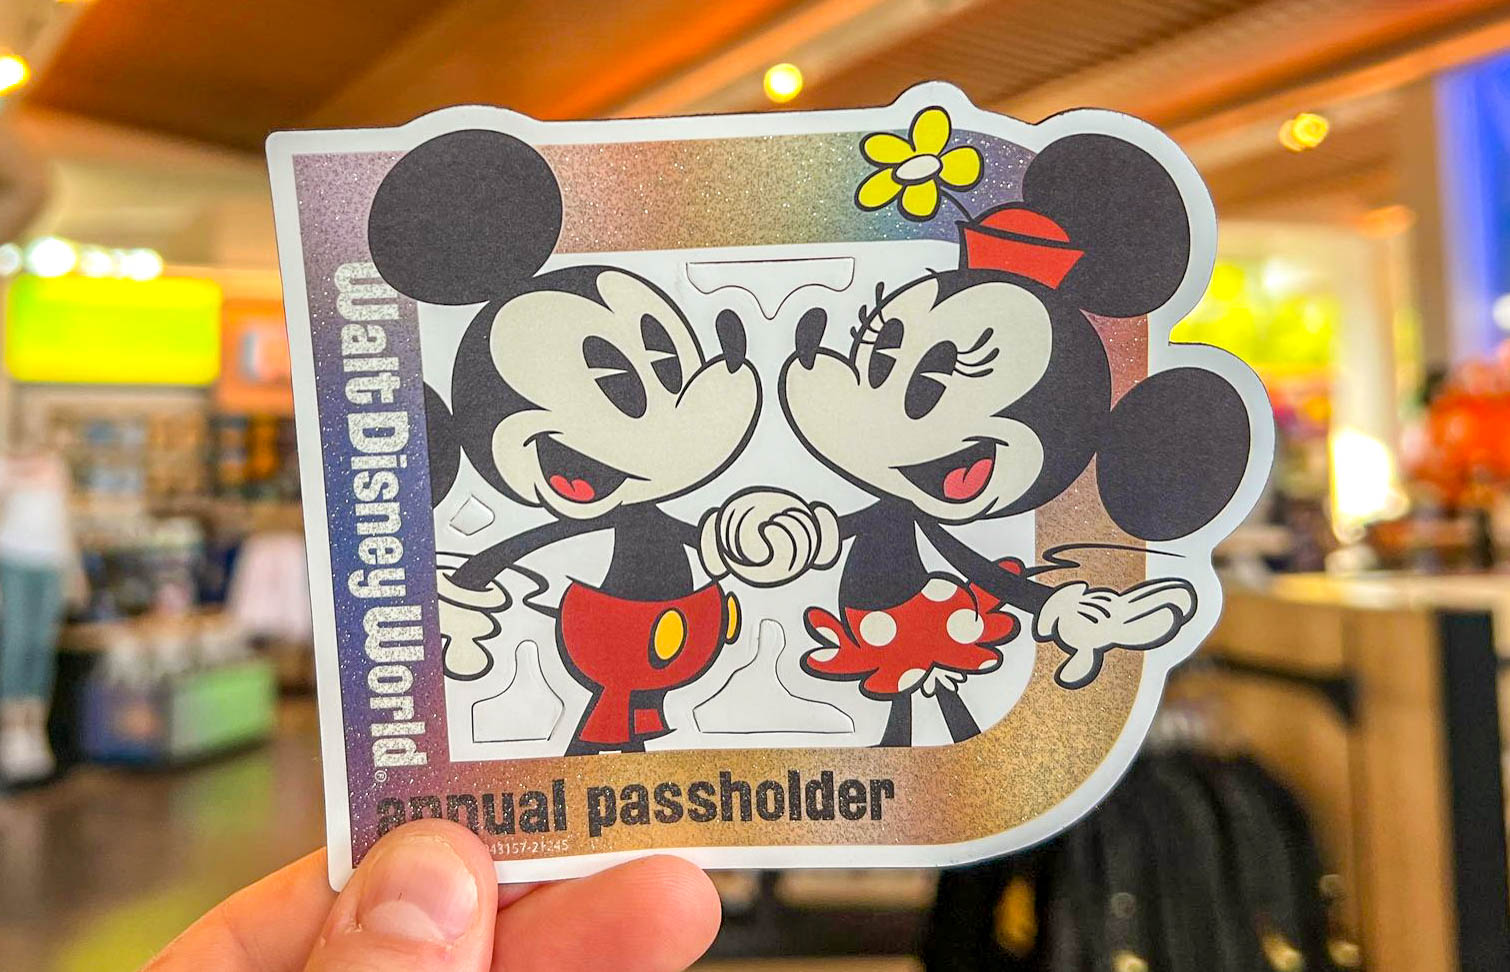 3 Disney World Annual Passholder to Be Rereleased For a